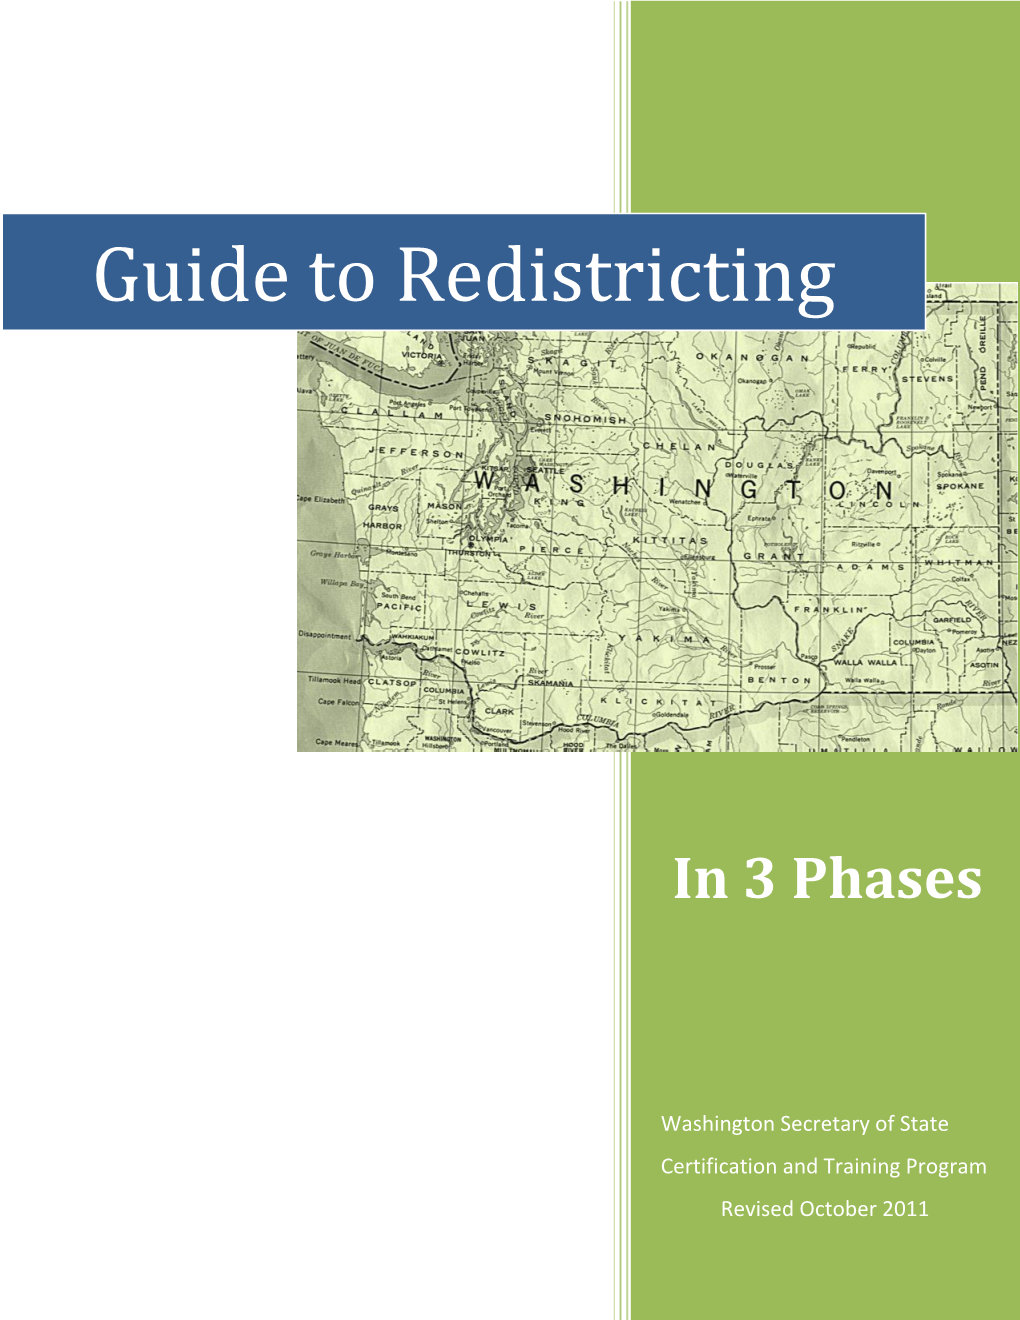 Guide to Redistricting